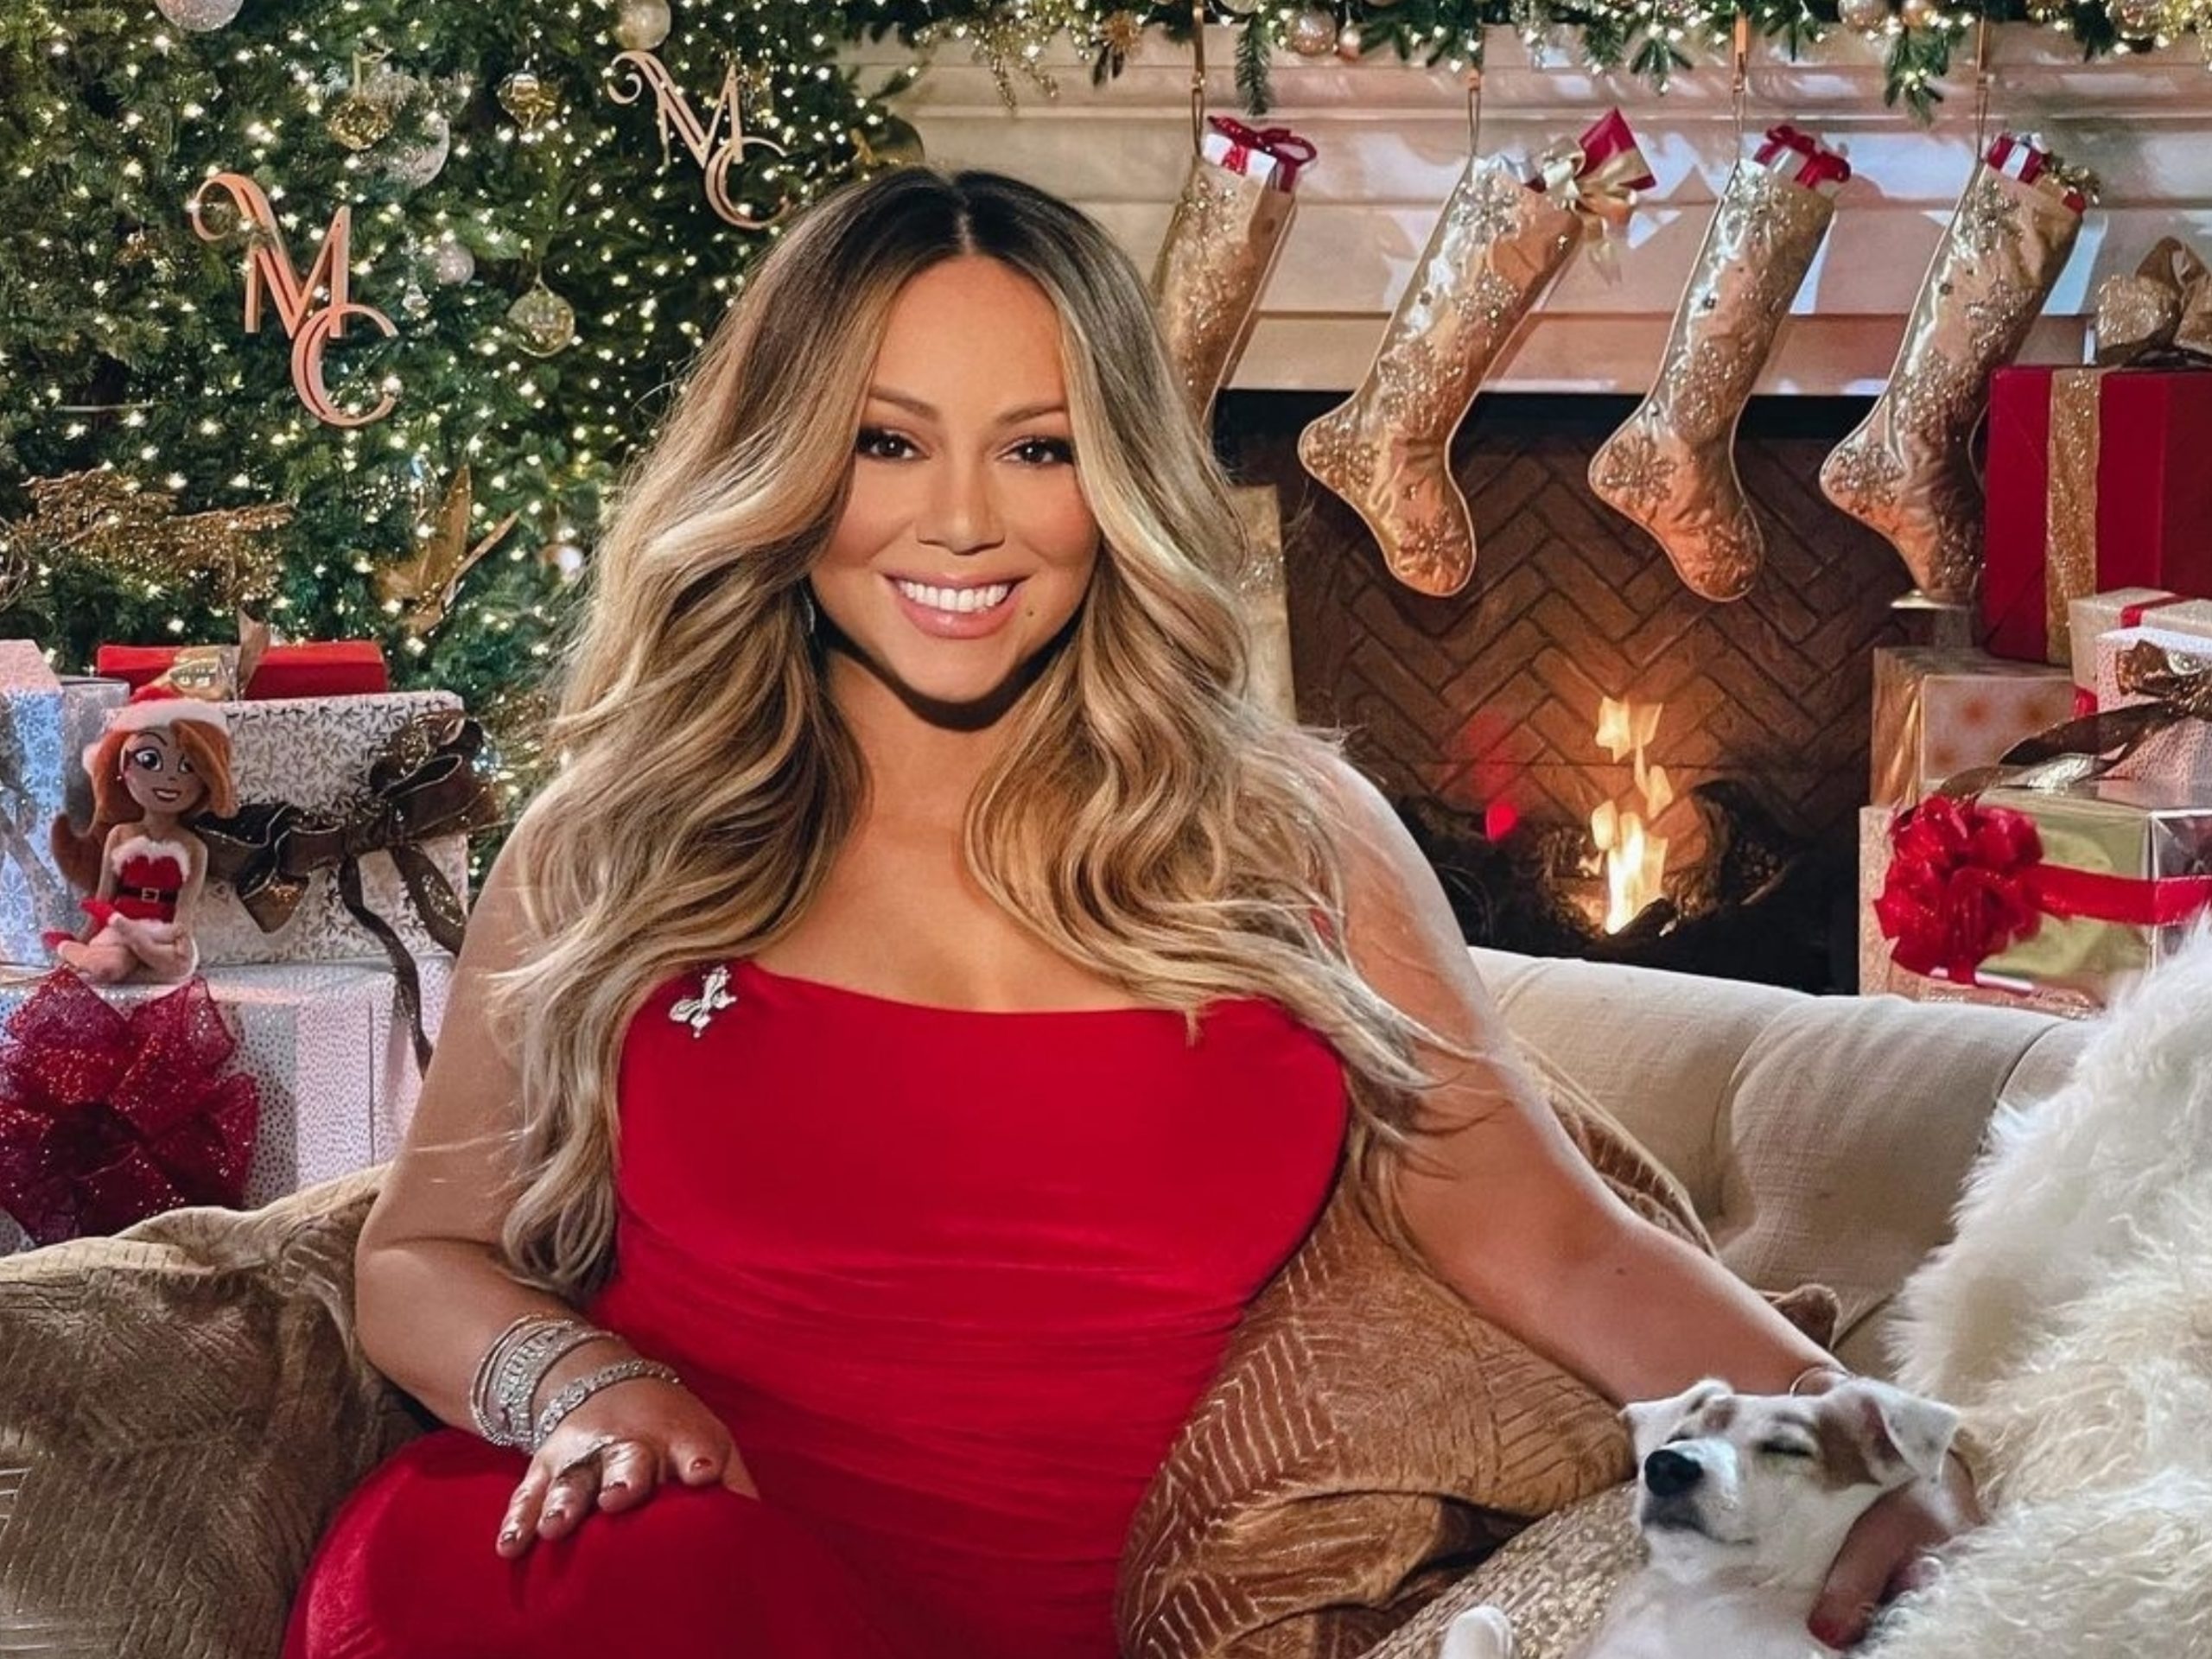 Mariah Carey Sued Over Hit Song “All I Want For Christmas Is You”